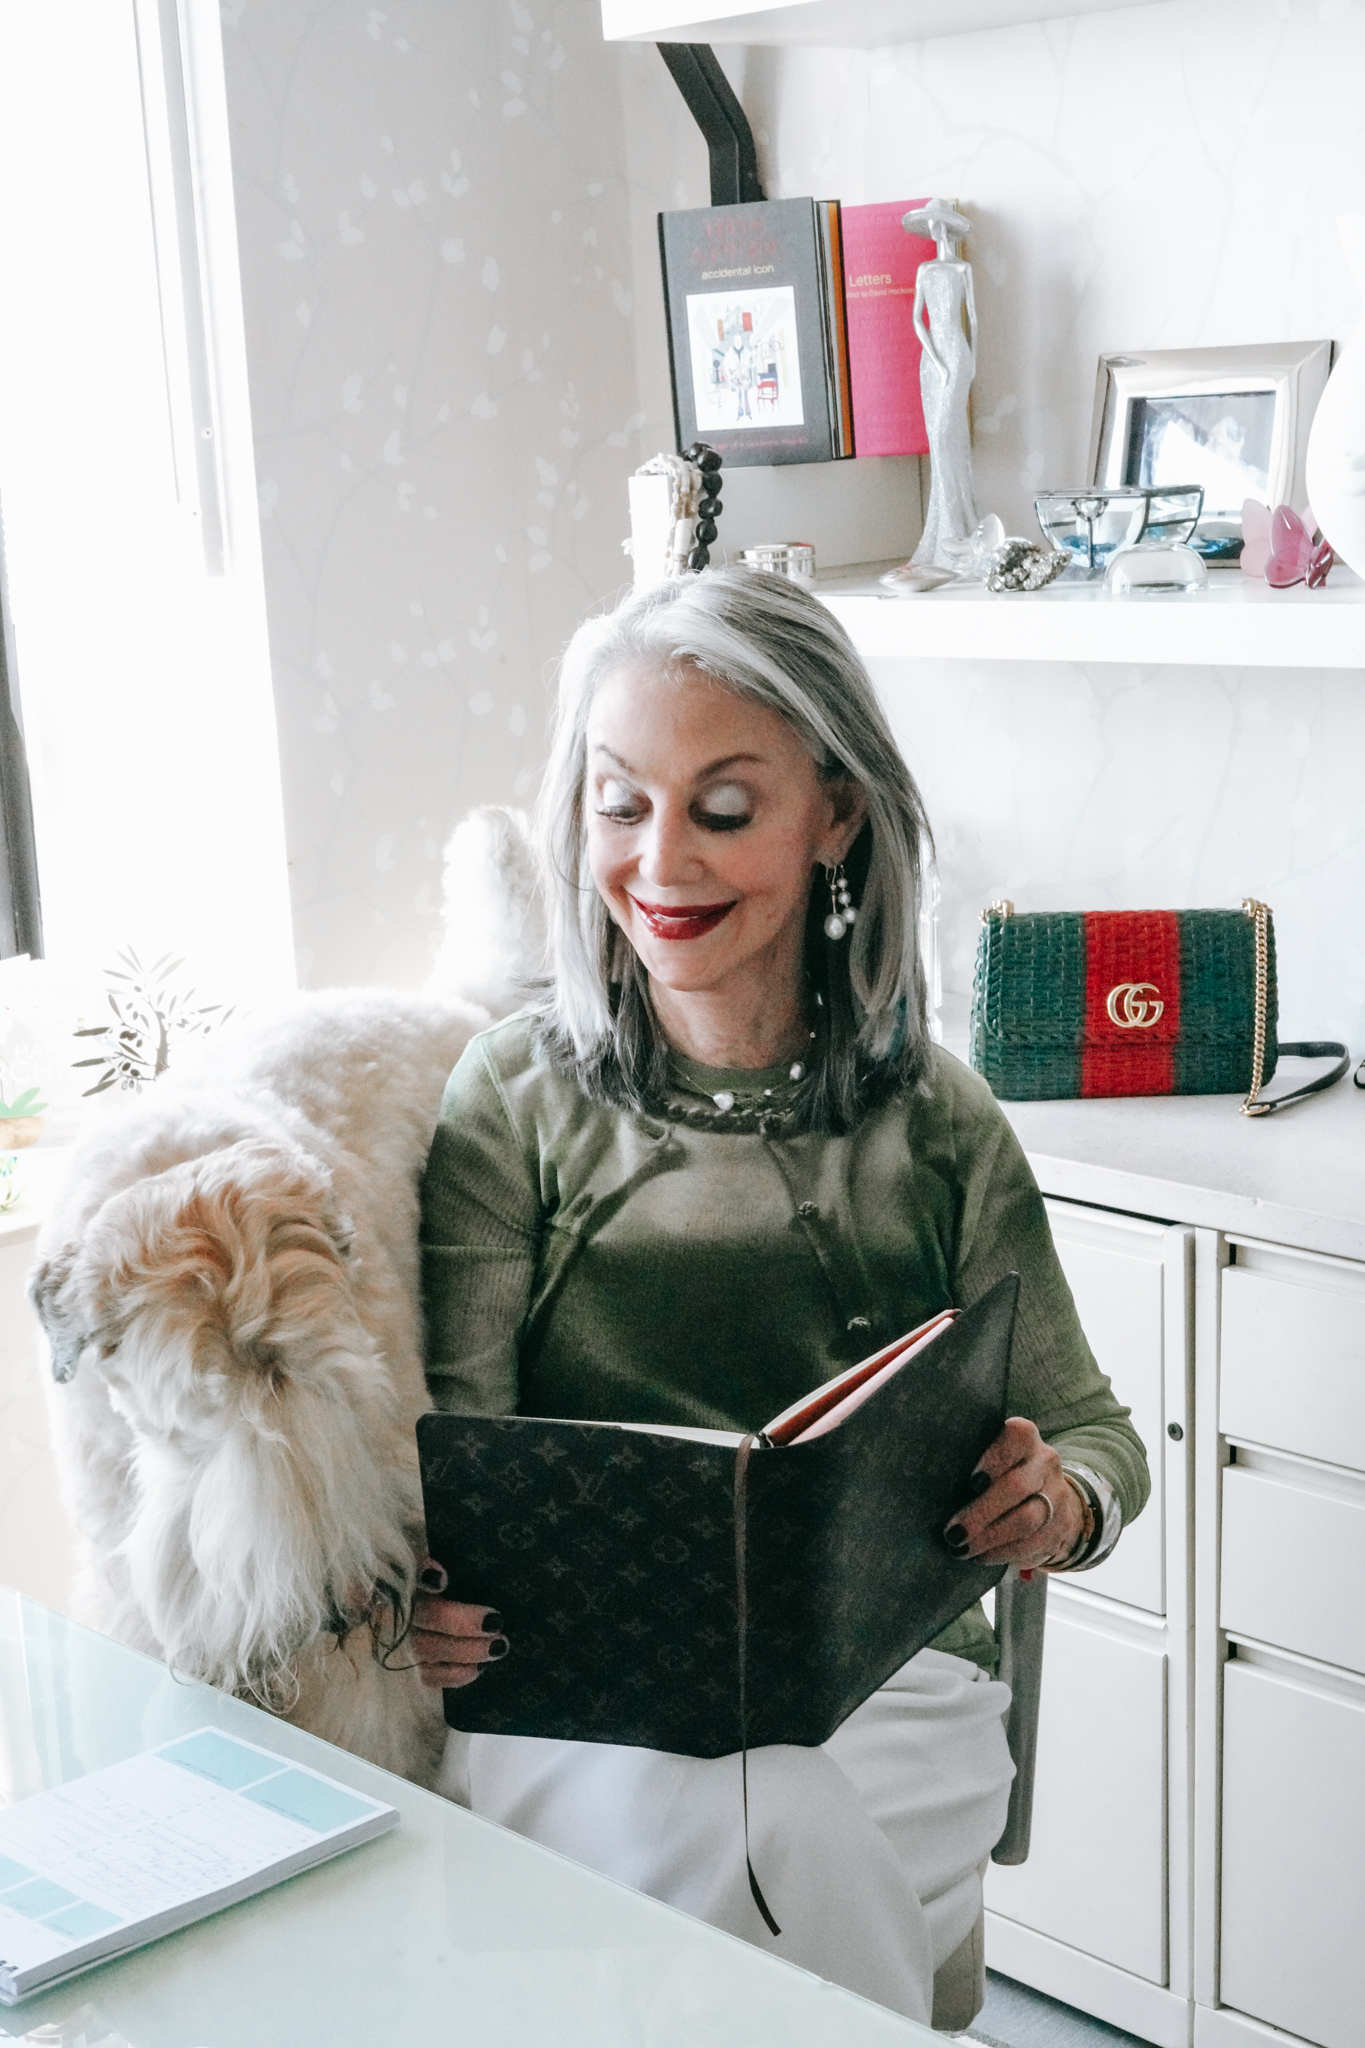 Honey Good reads to her dog, America as part of her night routine